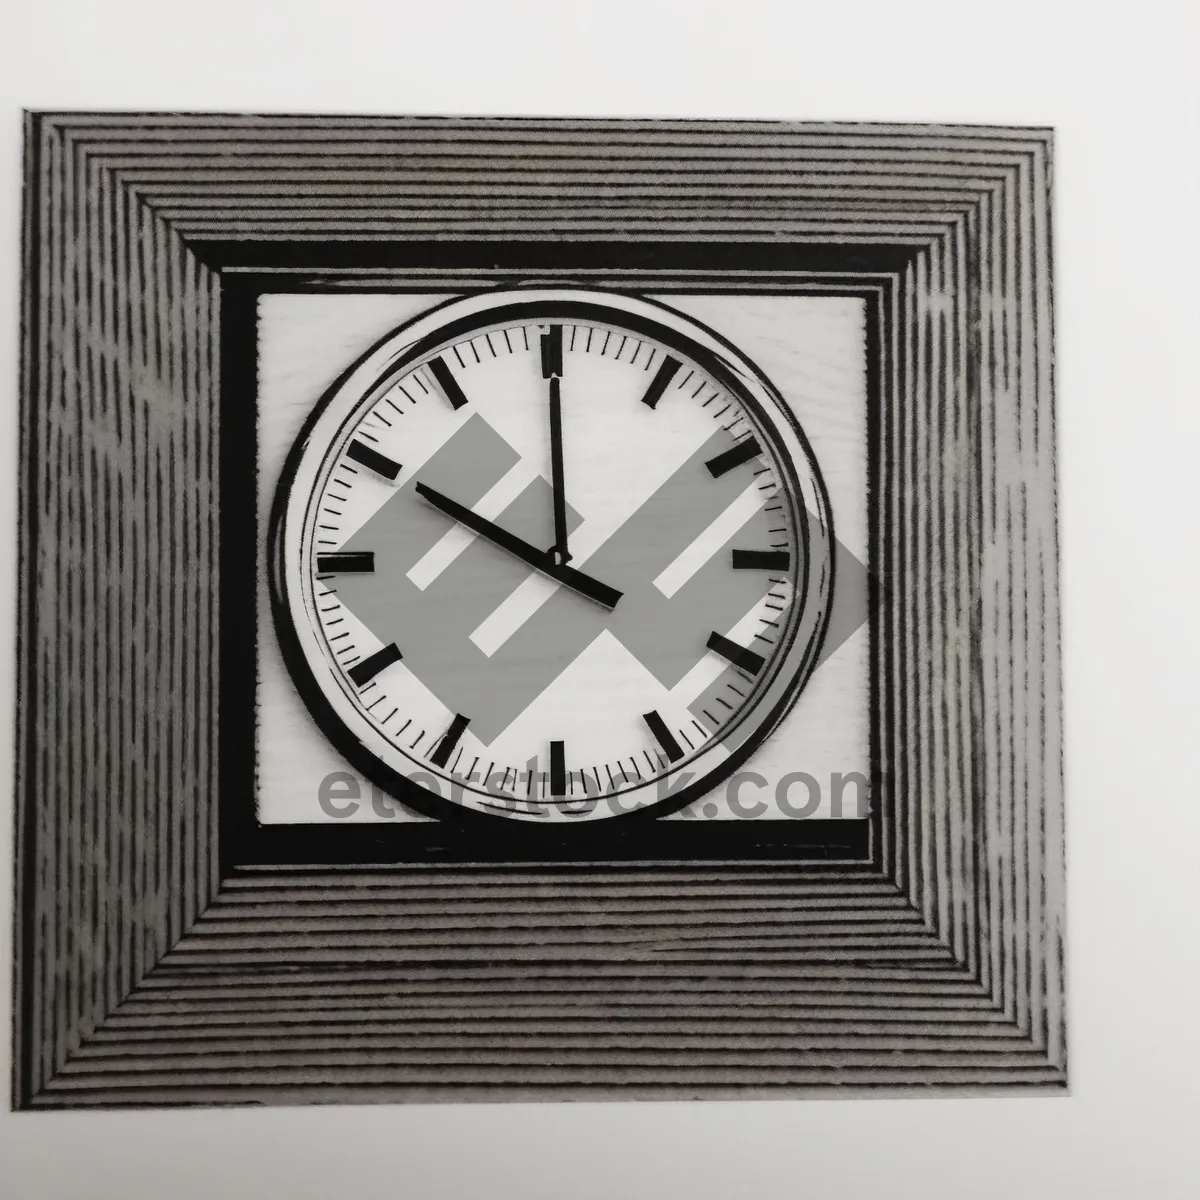 Picture of Timekeeper - Wall Clock with Analog Dial